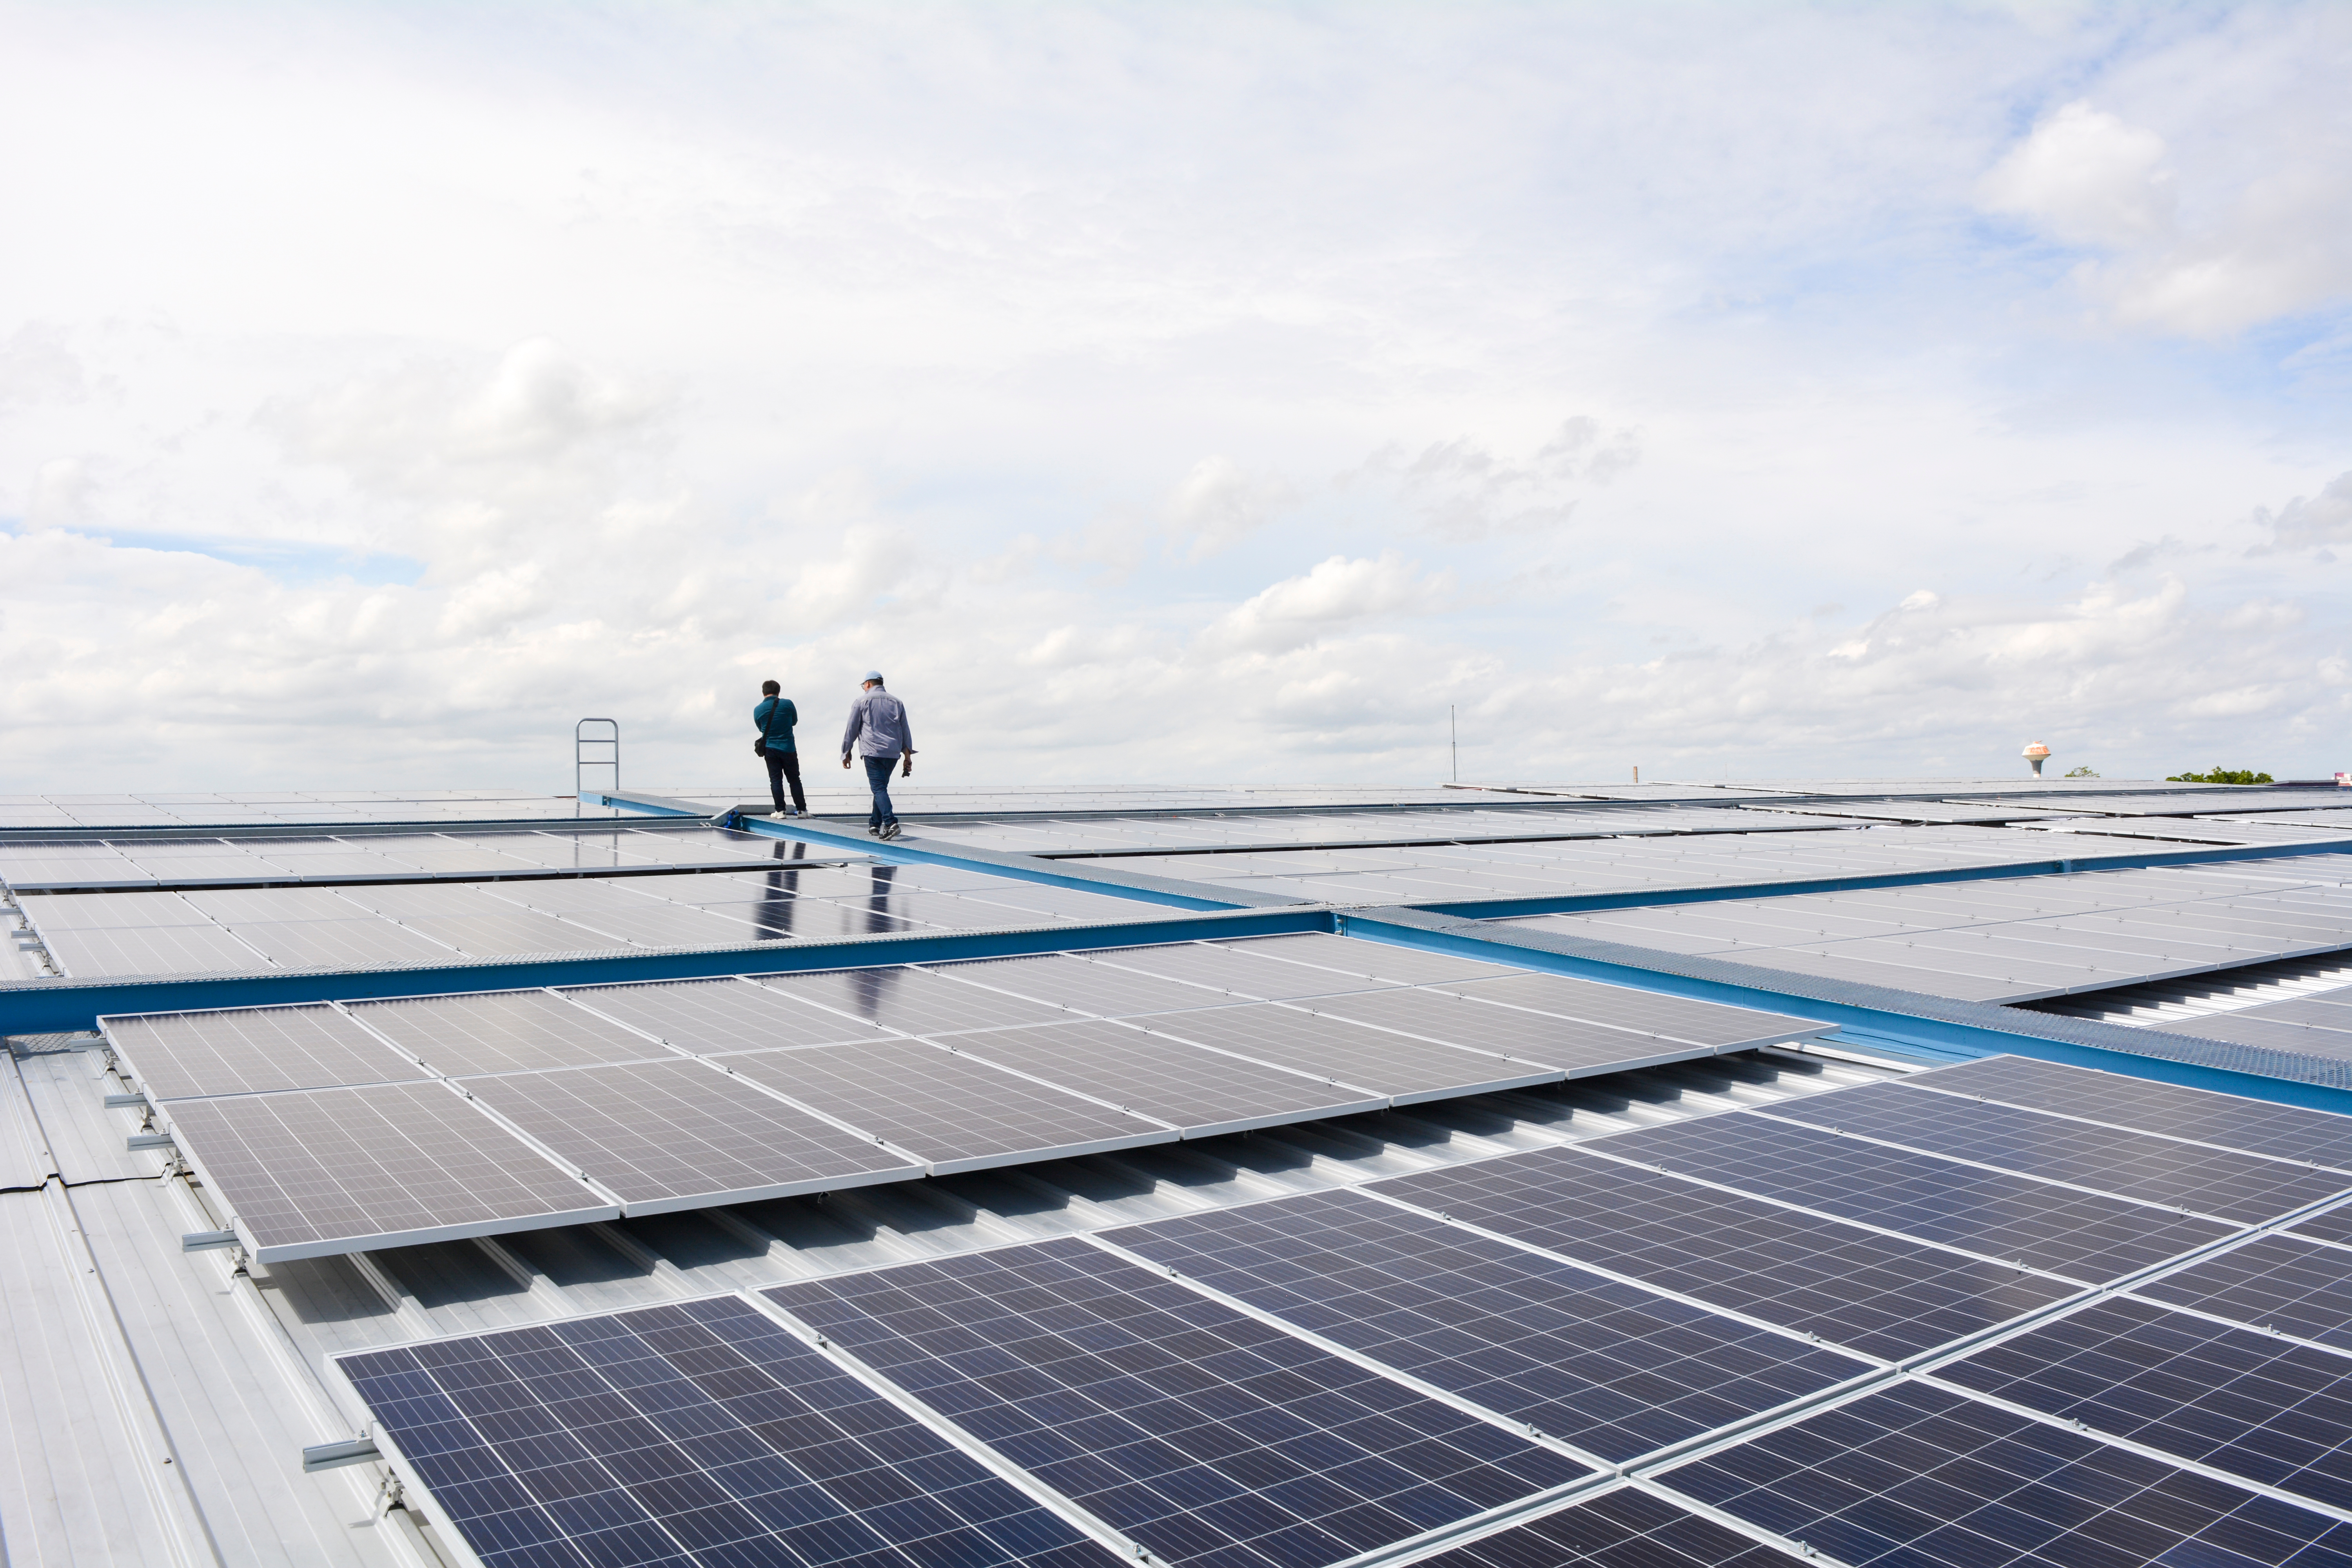 Two men standing on the rooftop of a building covered in solar panels on a sunny yet cloud filled day.